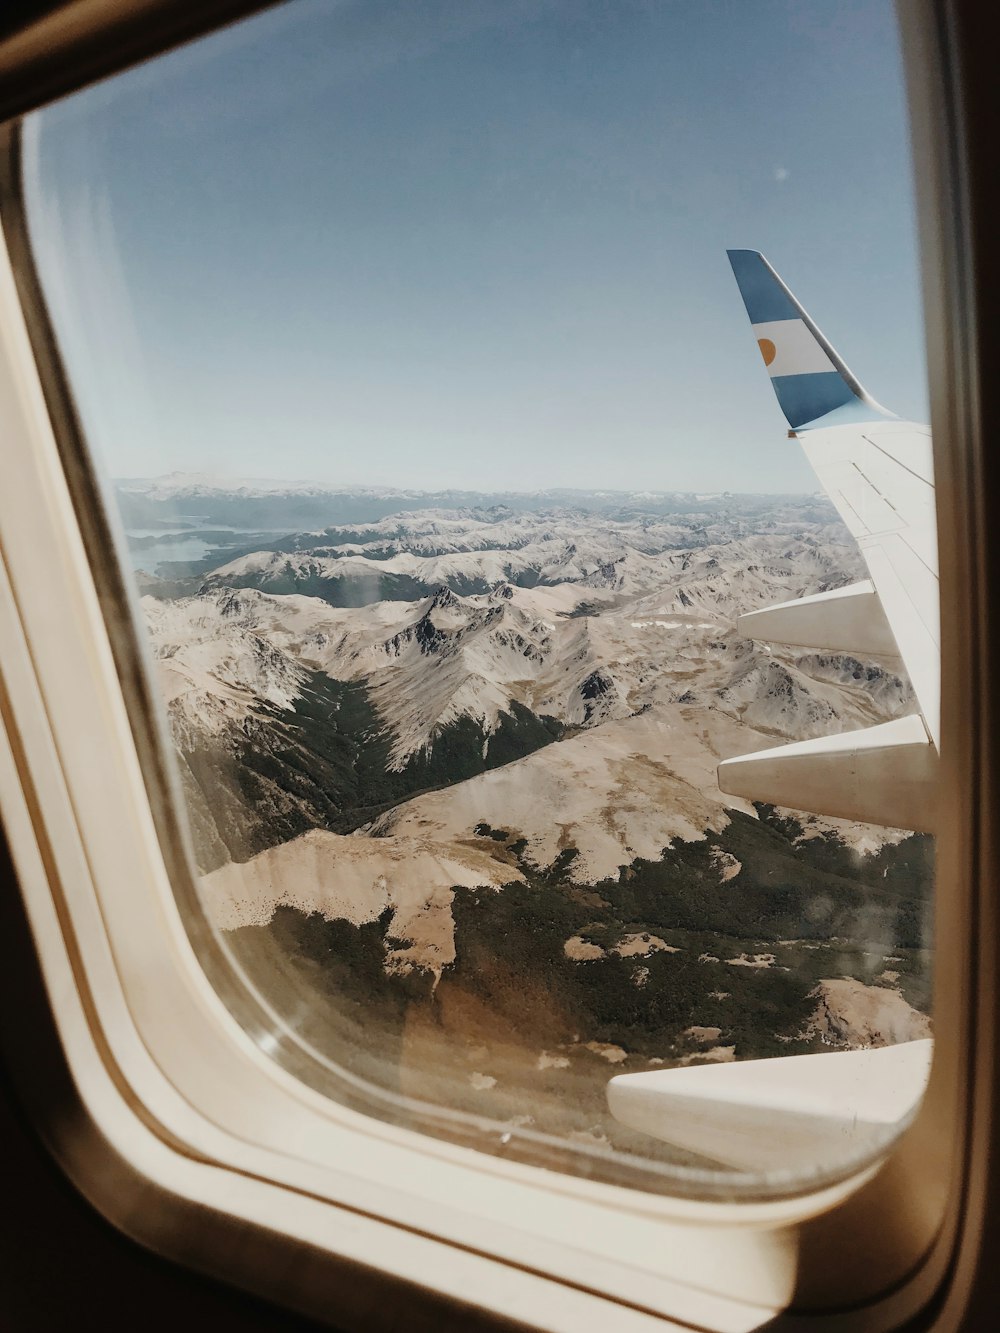 person taking picture of mountains inside airplane